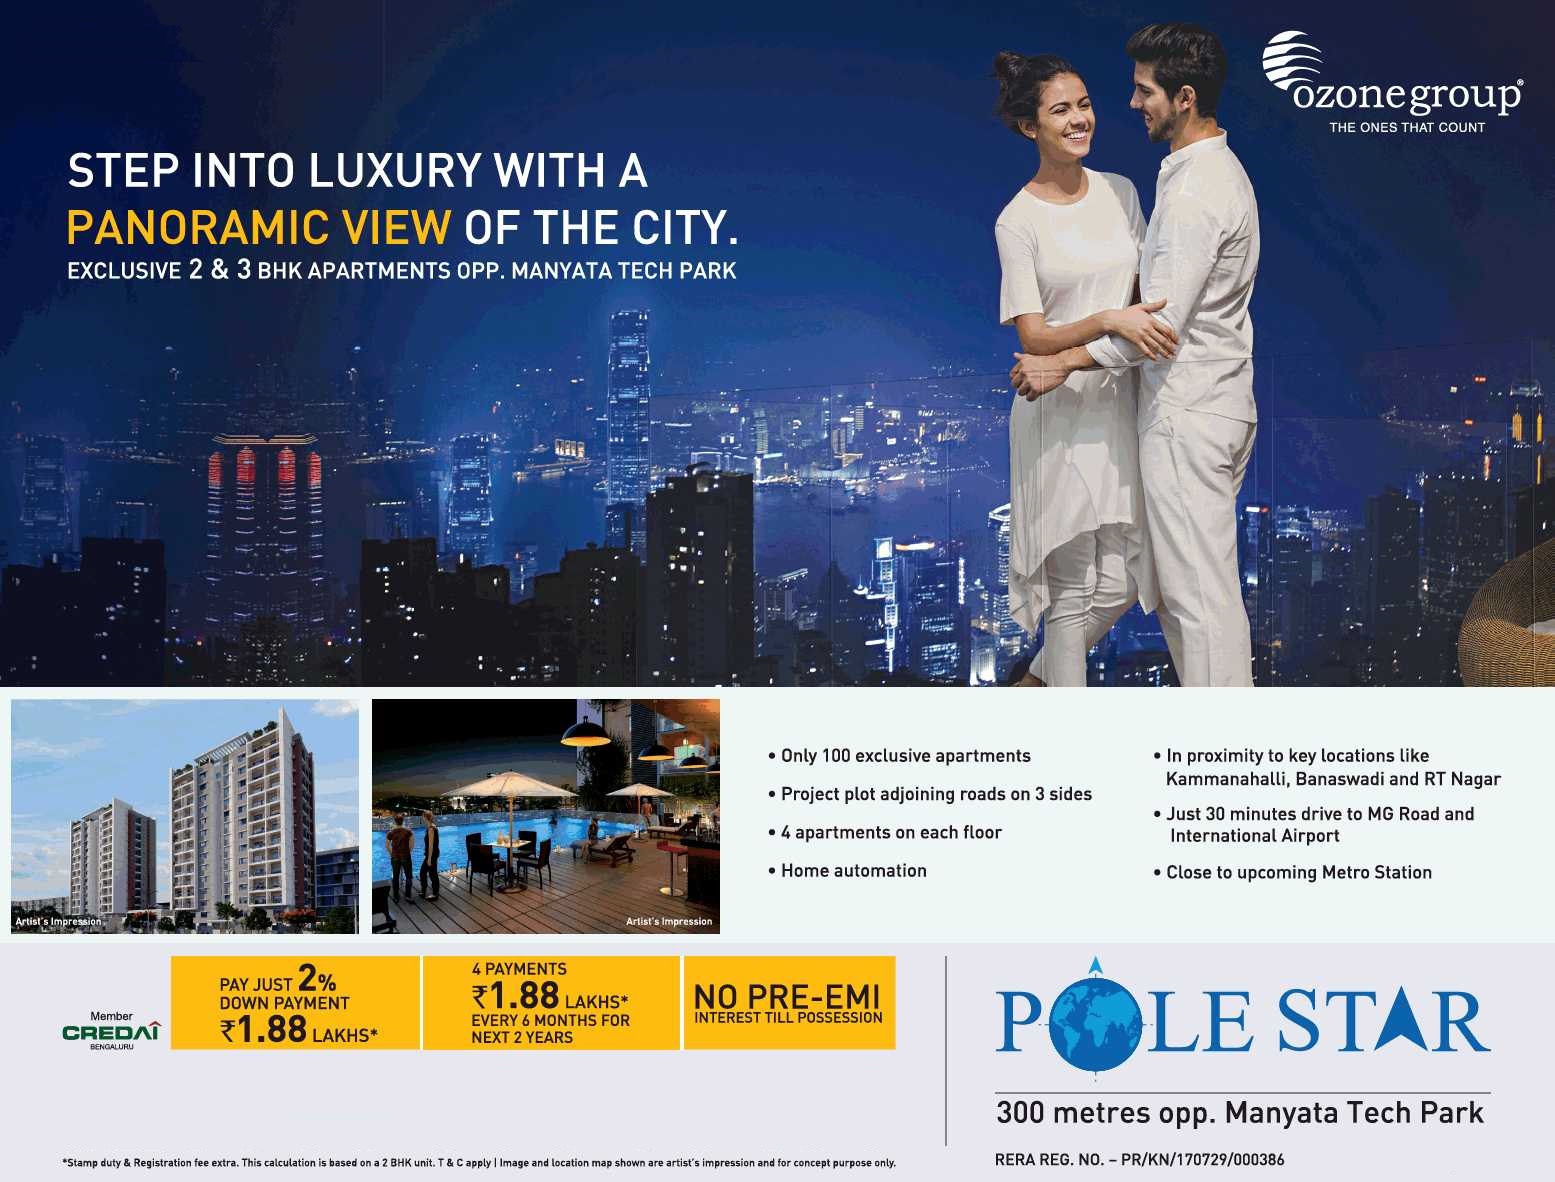 Book luxury apartments with a panoramic view of the city at Ozone Polestar in Bangalore Update